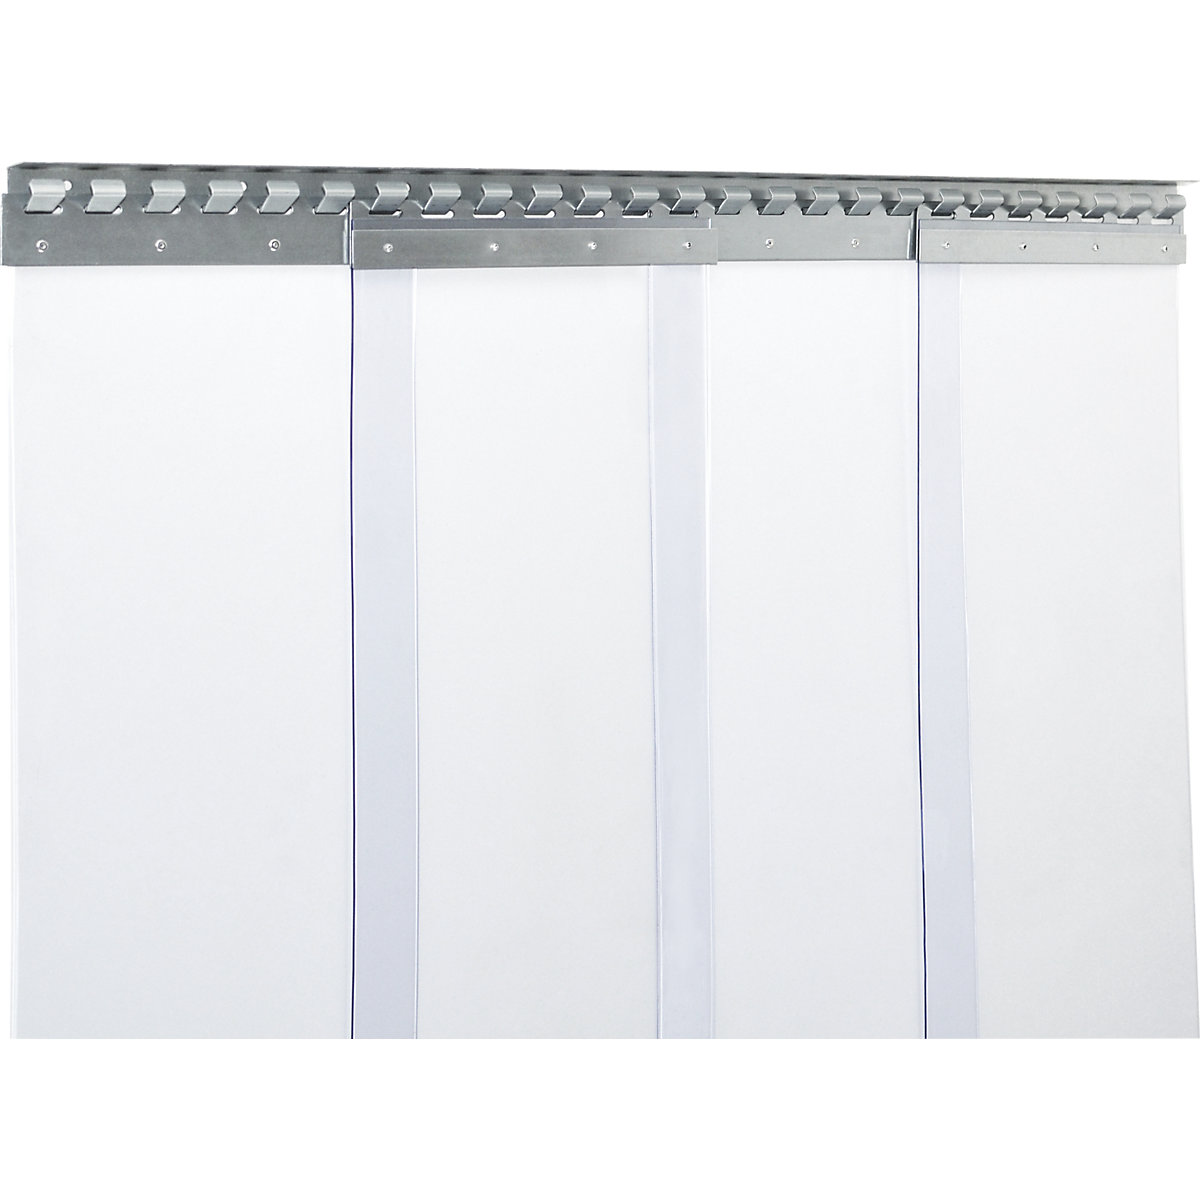 Strip curtain, price/m², width x thickness 300 x 3 mm, overlap 1 hook = 54 mm-8